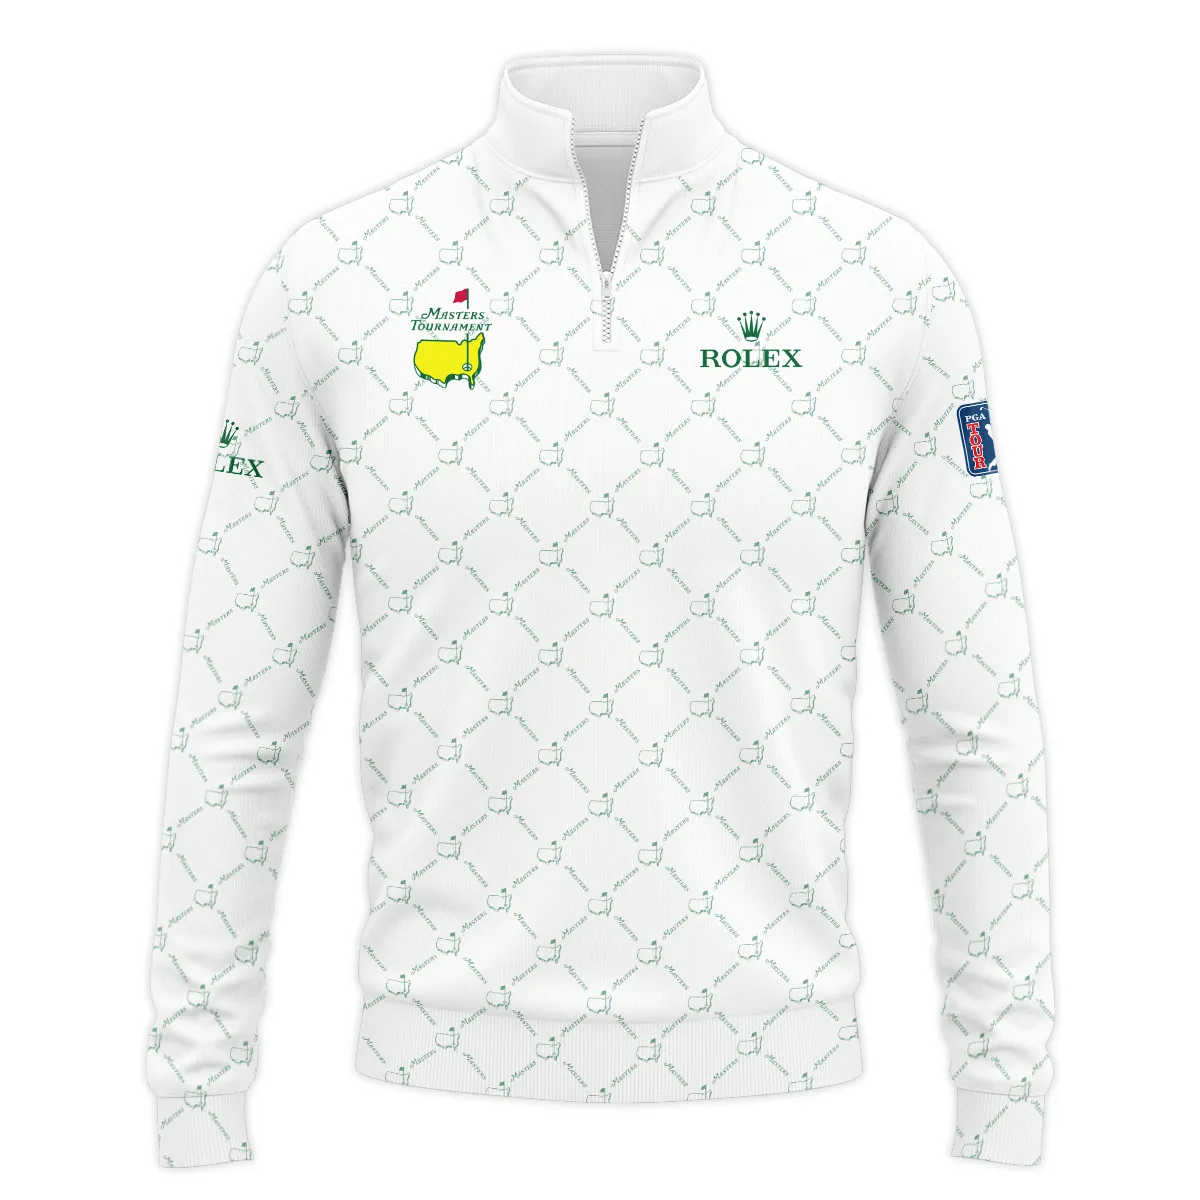 Golf Sport Pattern Color White Mix Masters Tournament Rolex Sleeveless Jacket Style Classic